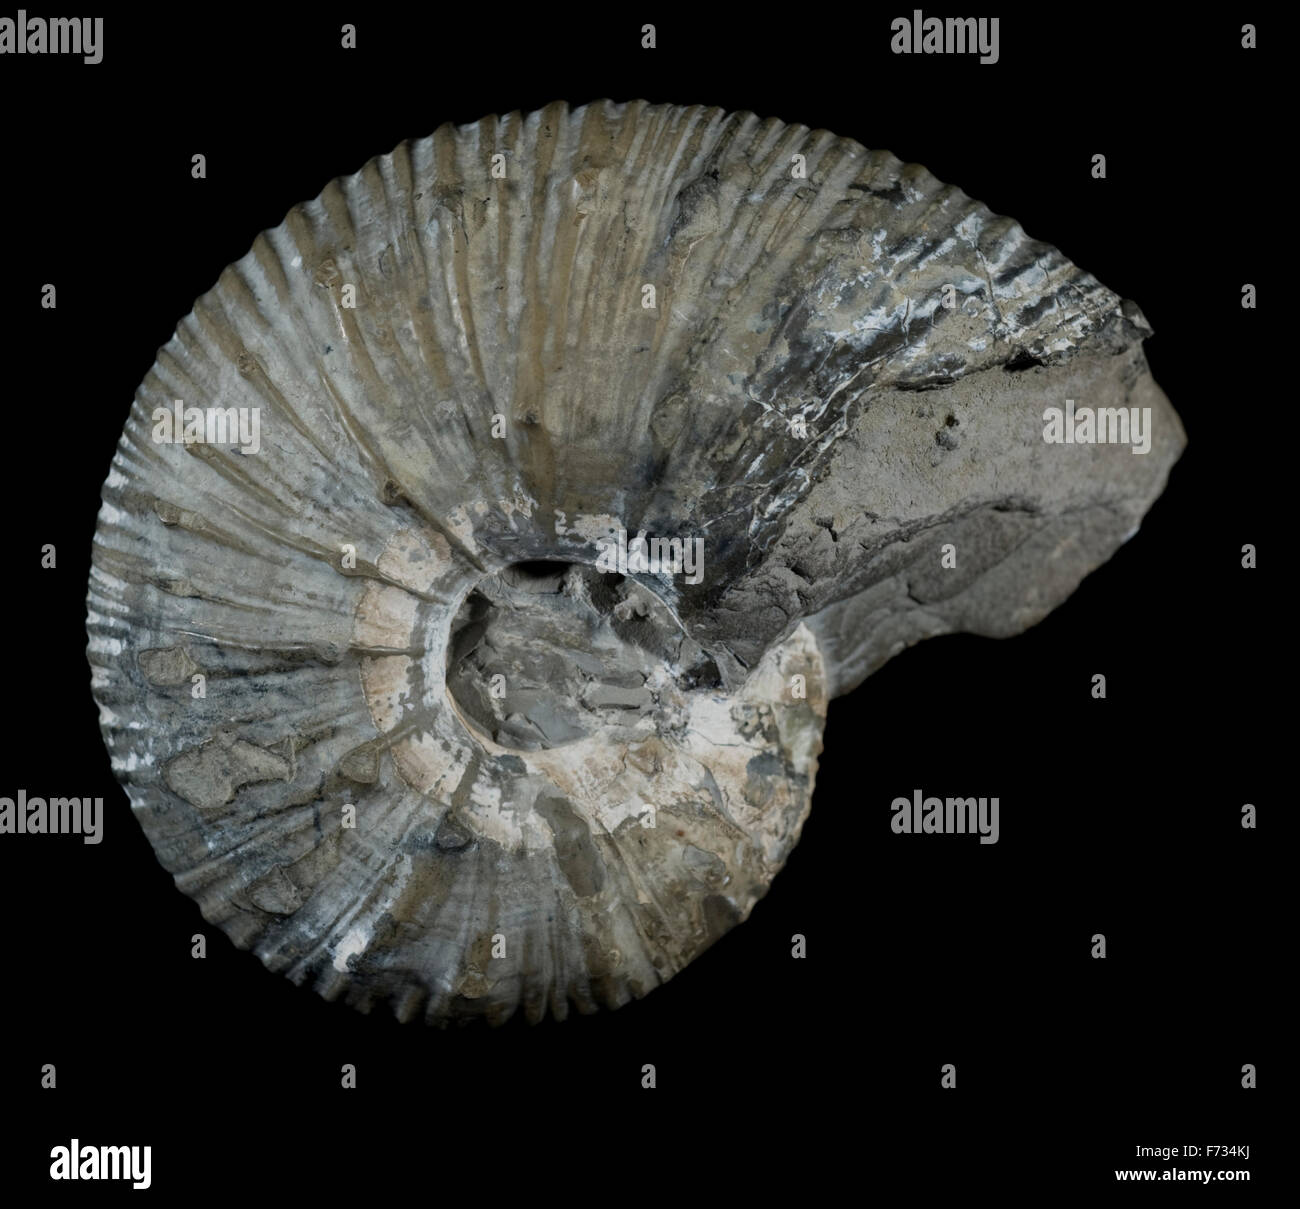 Liparoceras henleyi, a fossil ammonite from the Middle Lias, Jurassic period, Charmouth, Dorset, UK. Stock Photo